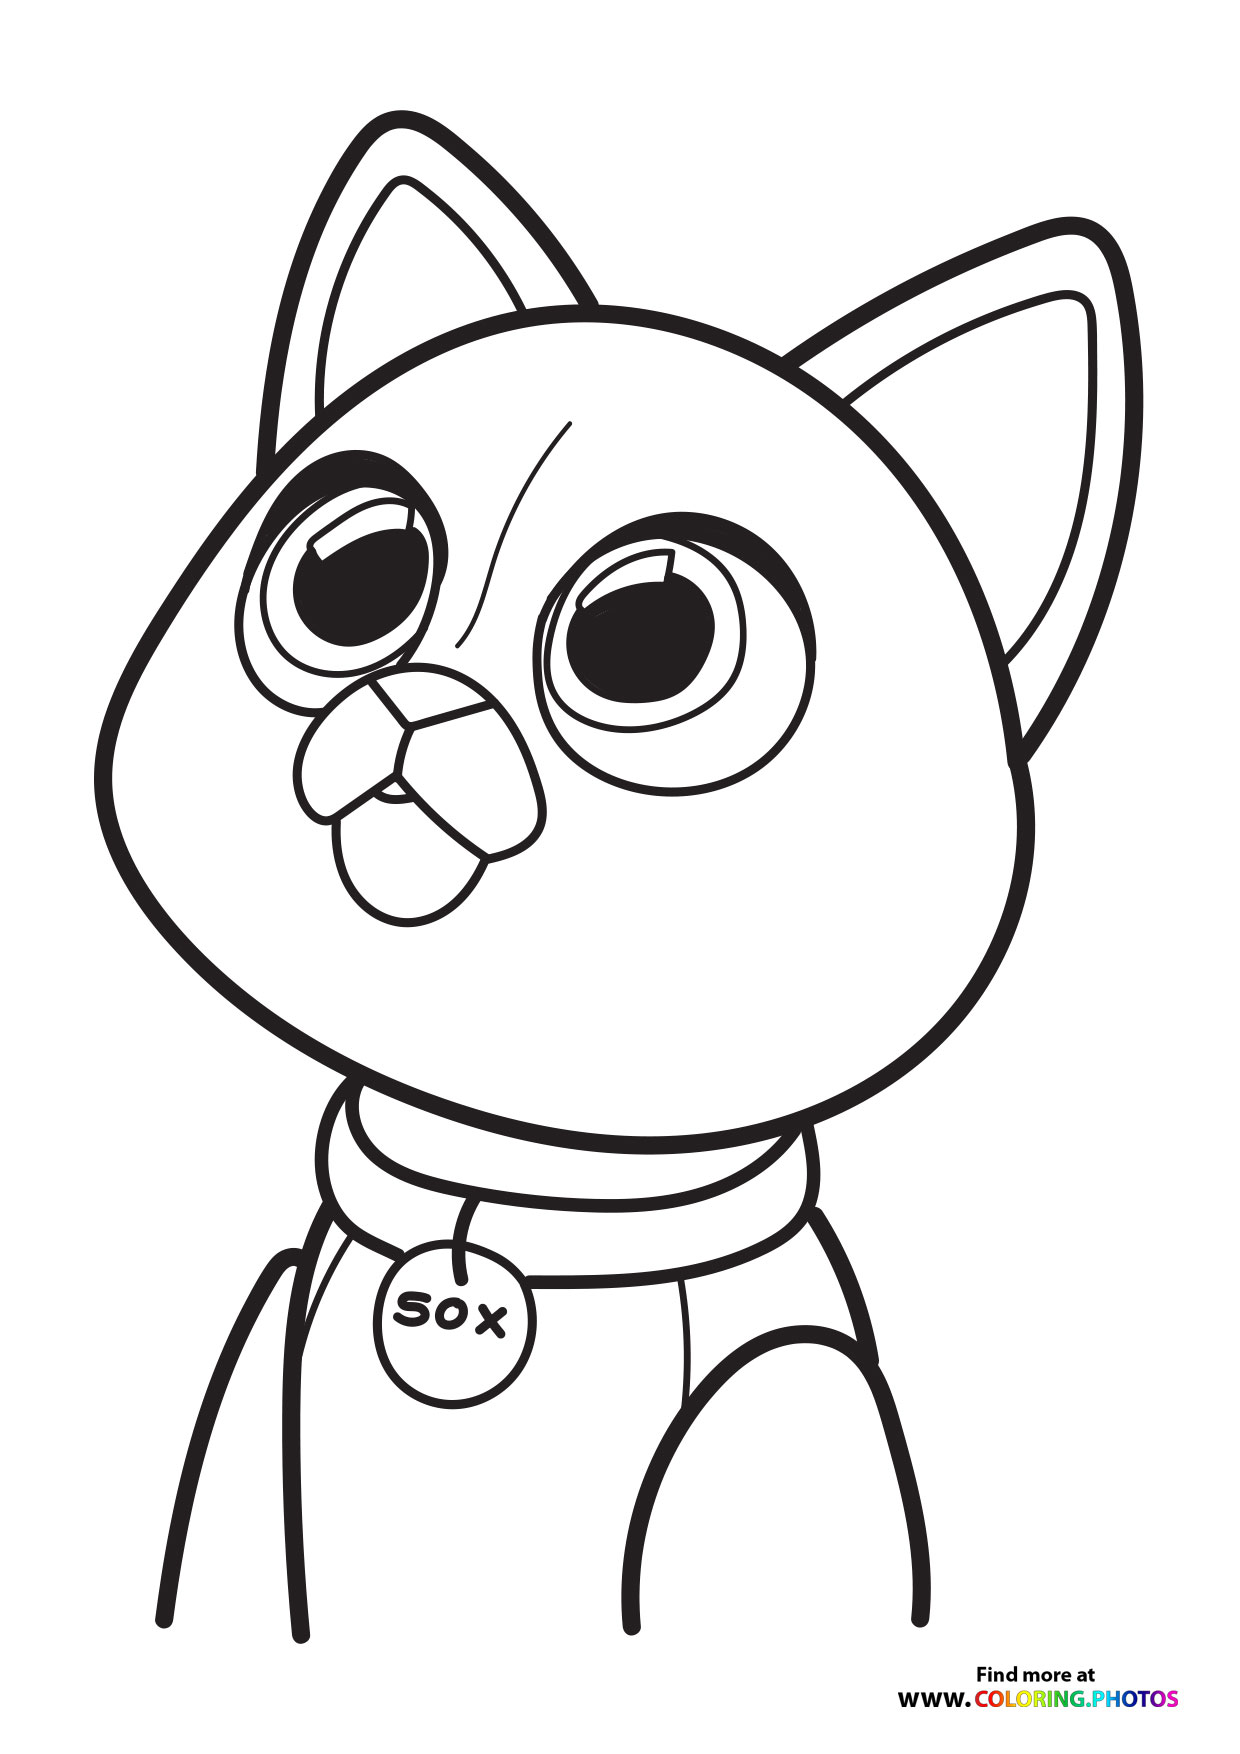 Cute Buzz and Sox - Coloring Pages for kids